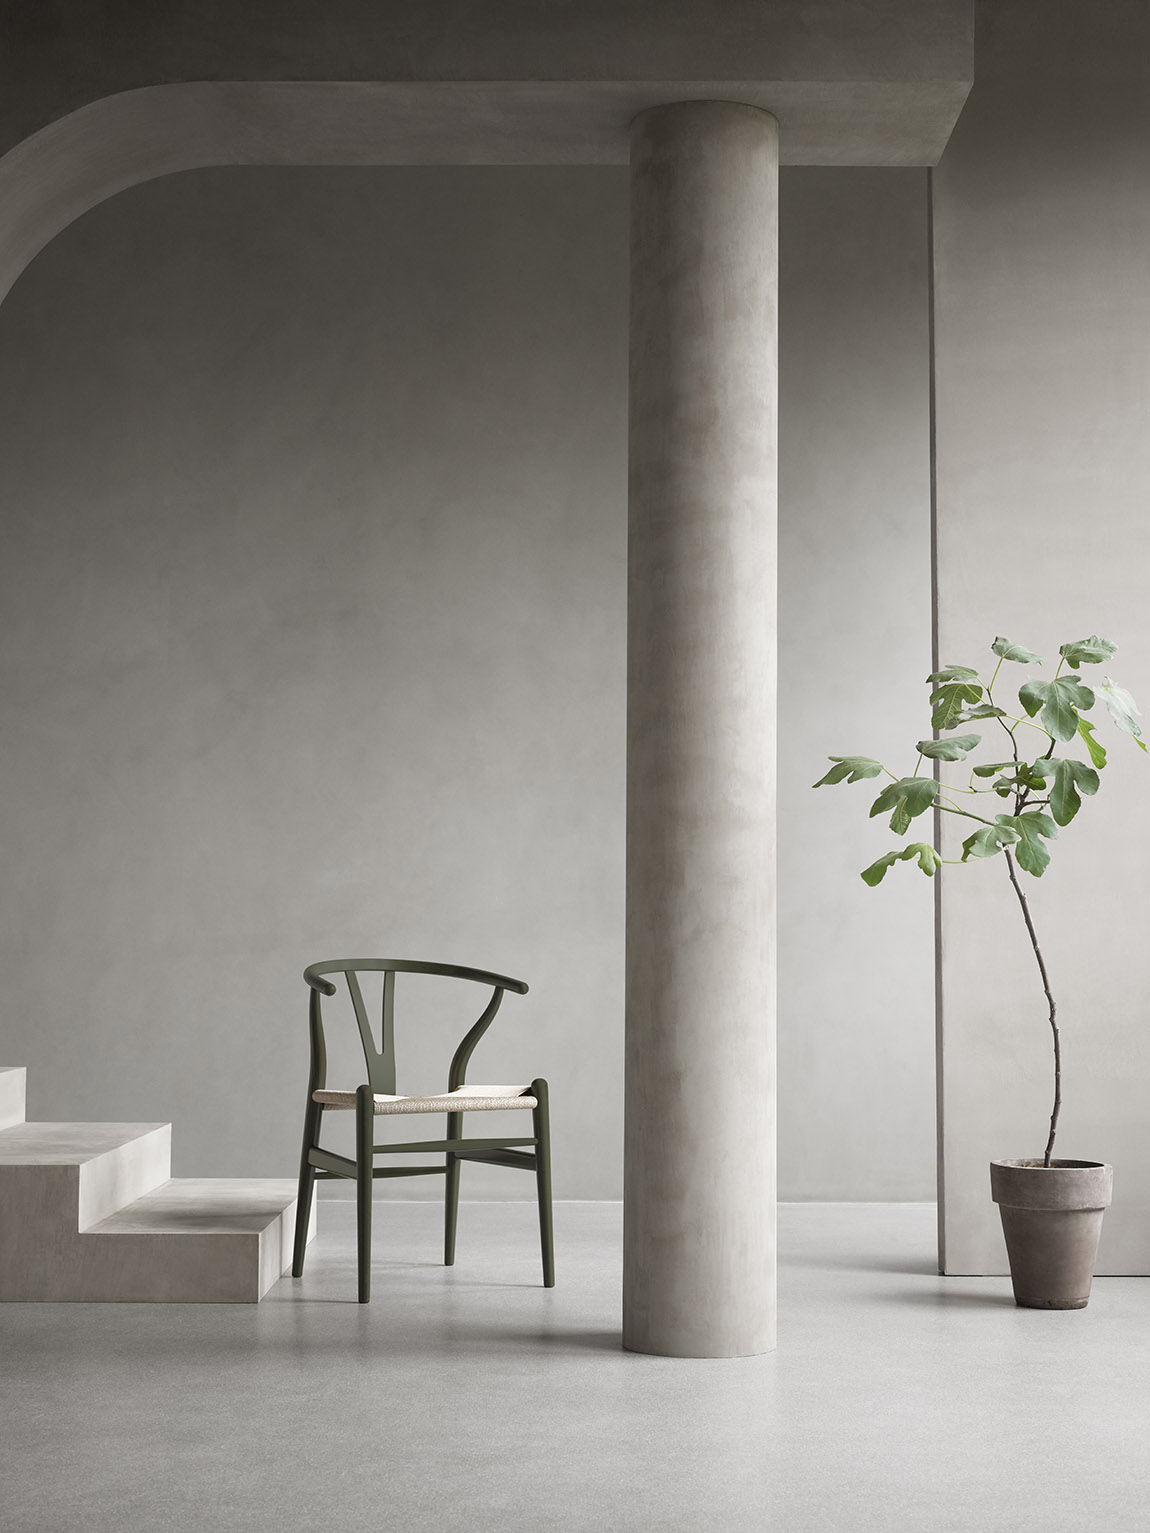 We Love This - The icons of Scandinavian minimalism
